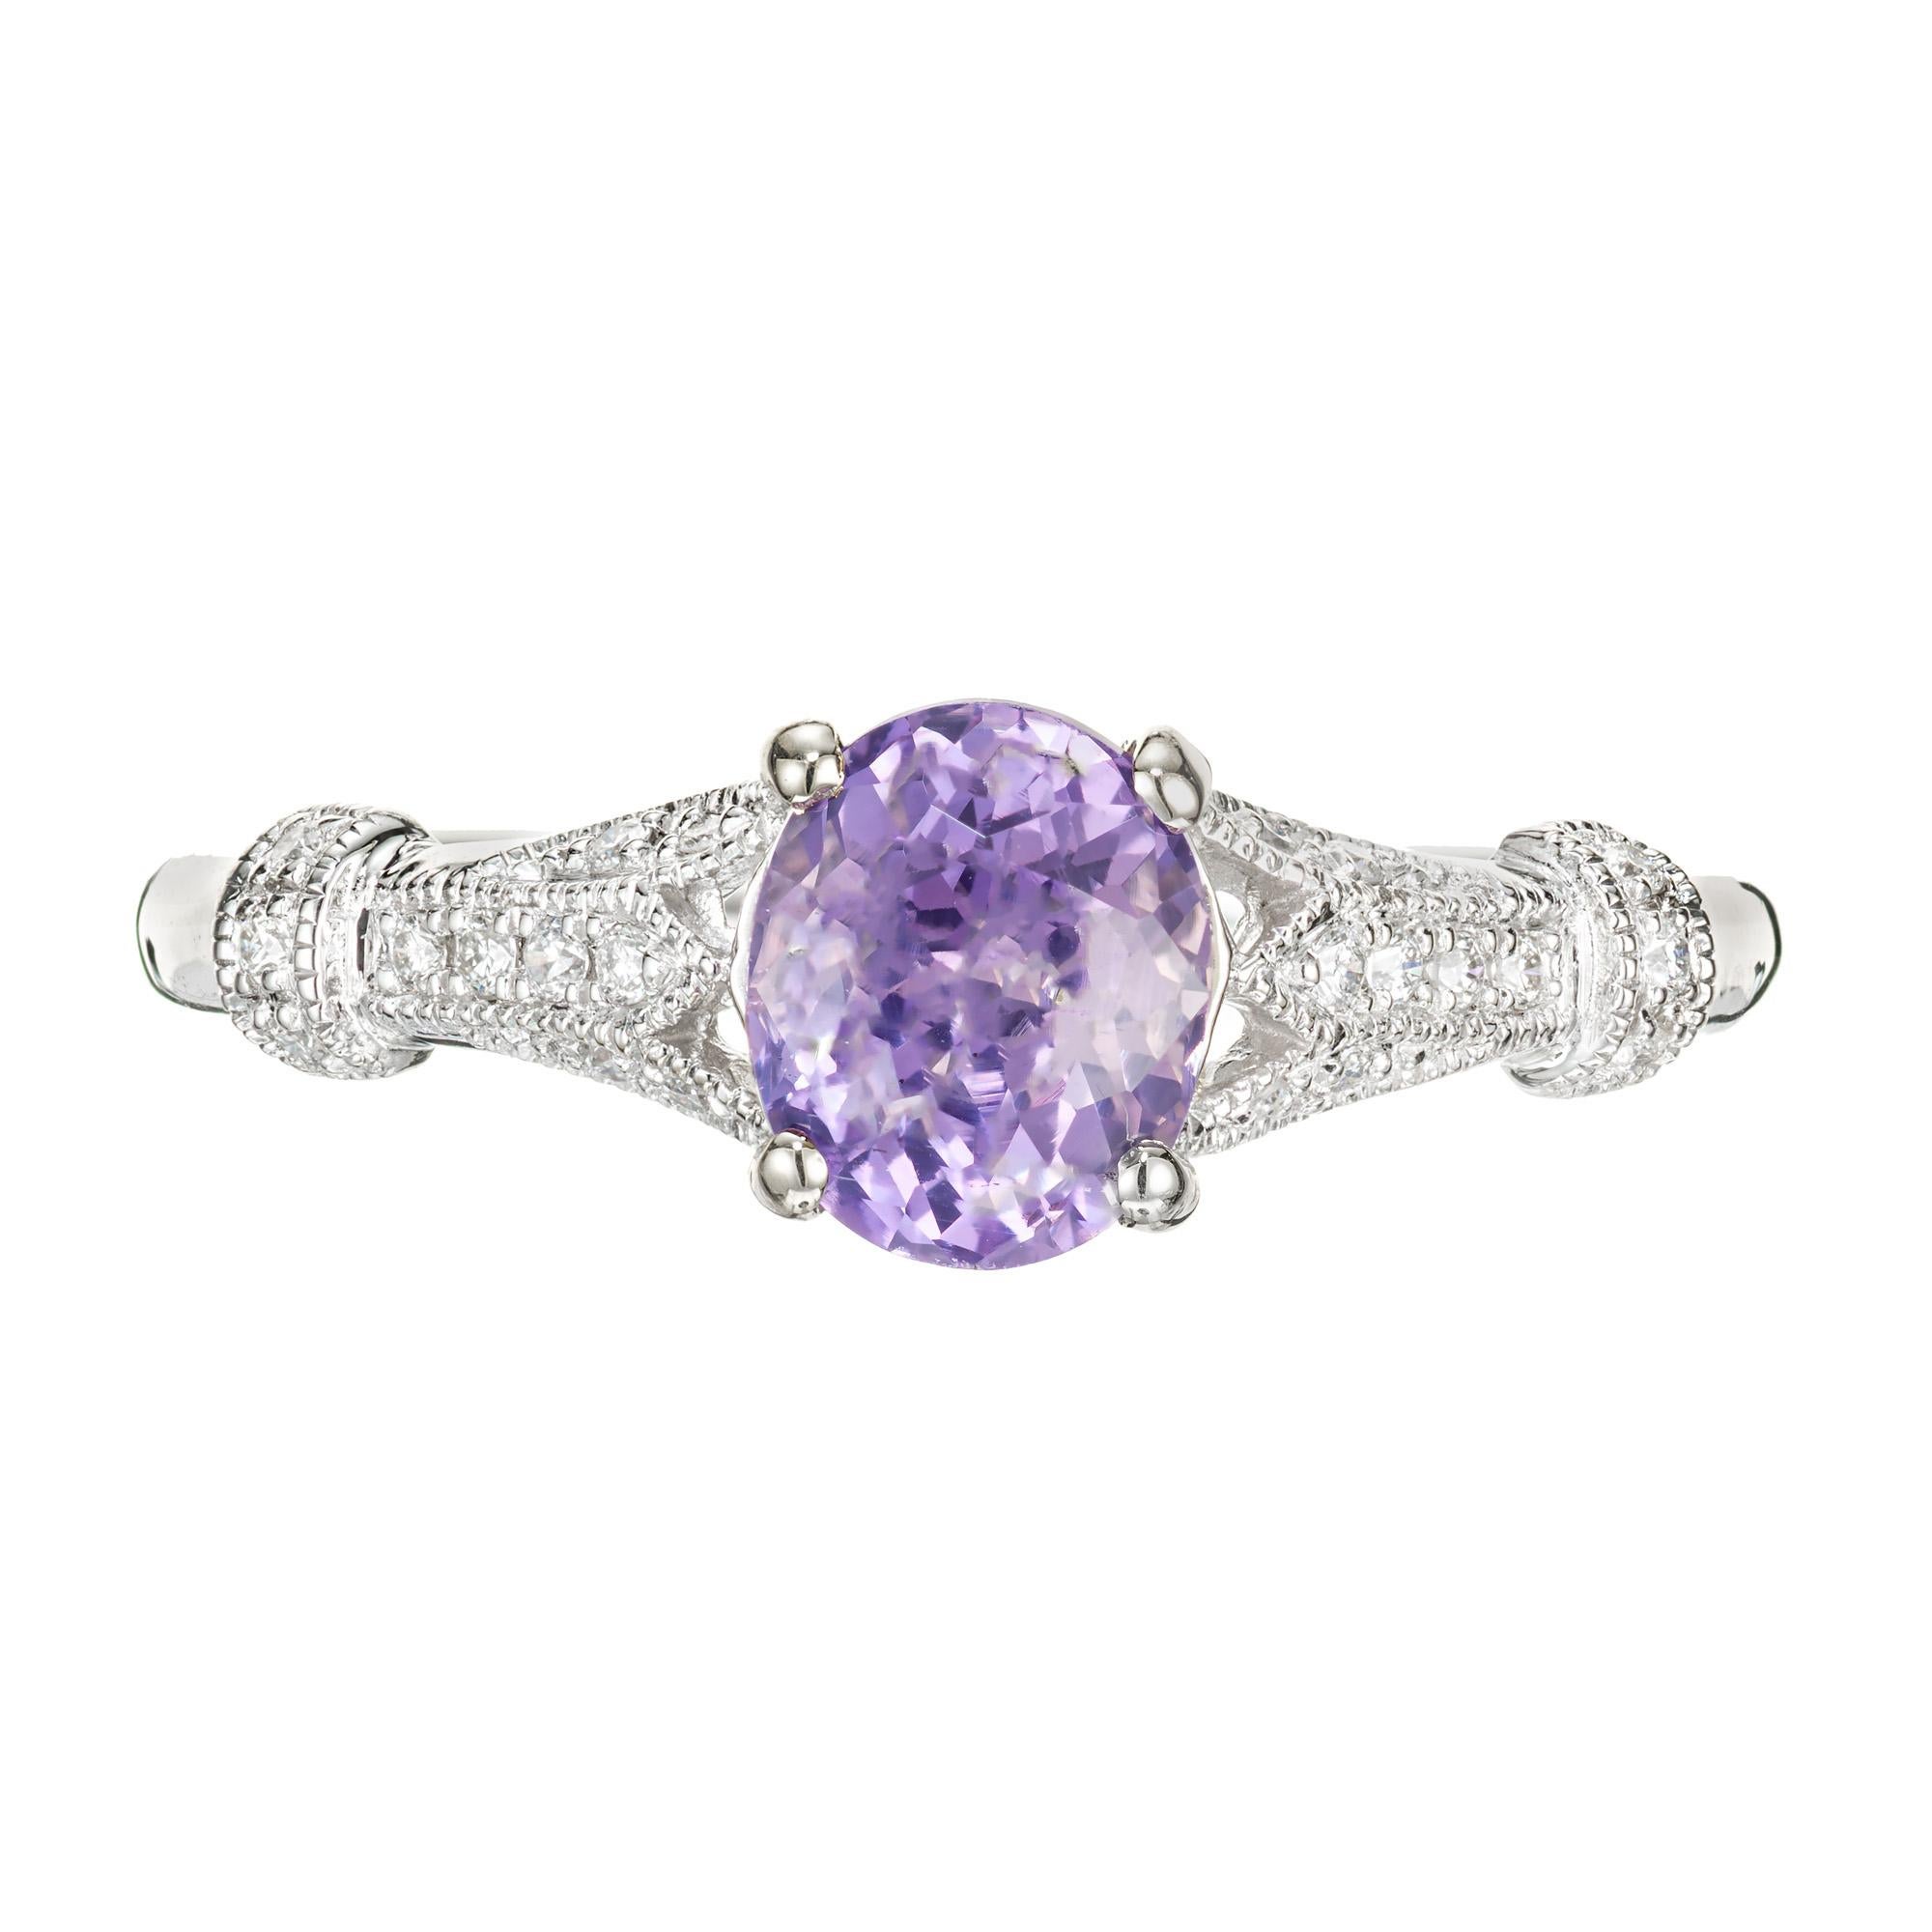 Purple and pink sapphire and diamond engagement ring. GIA certified 1.24cts oval center sapphire, 18k white gold antique inspired setting with 22 round accent diamonds. GIA certified natural. Designed and crafted in the Peter Suchy workshop.

1 oval